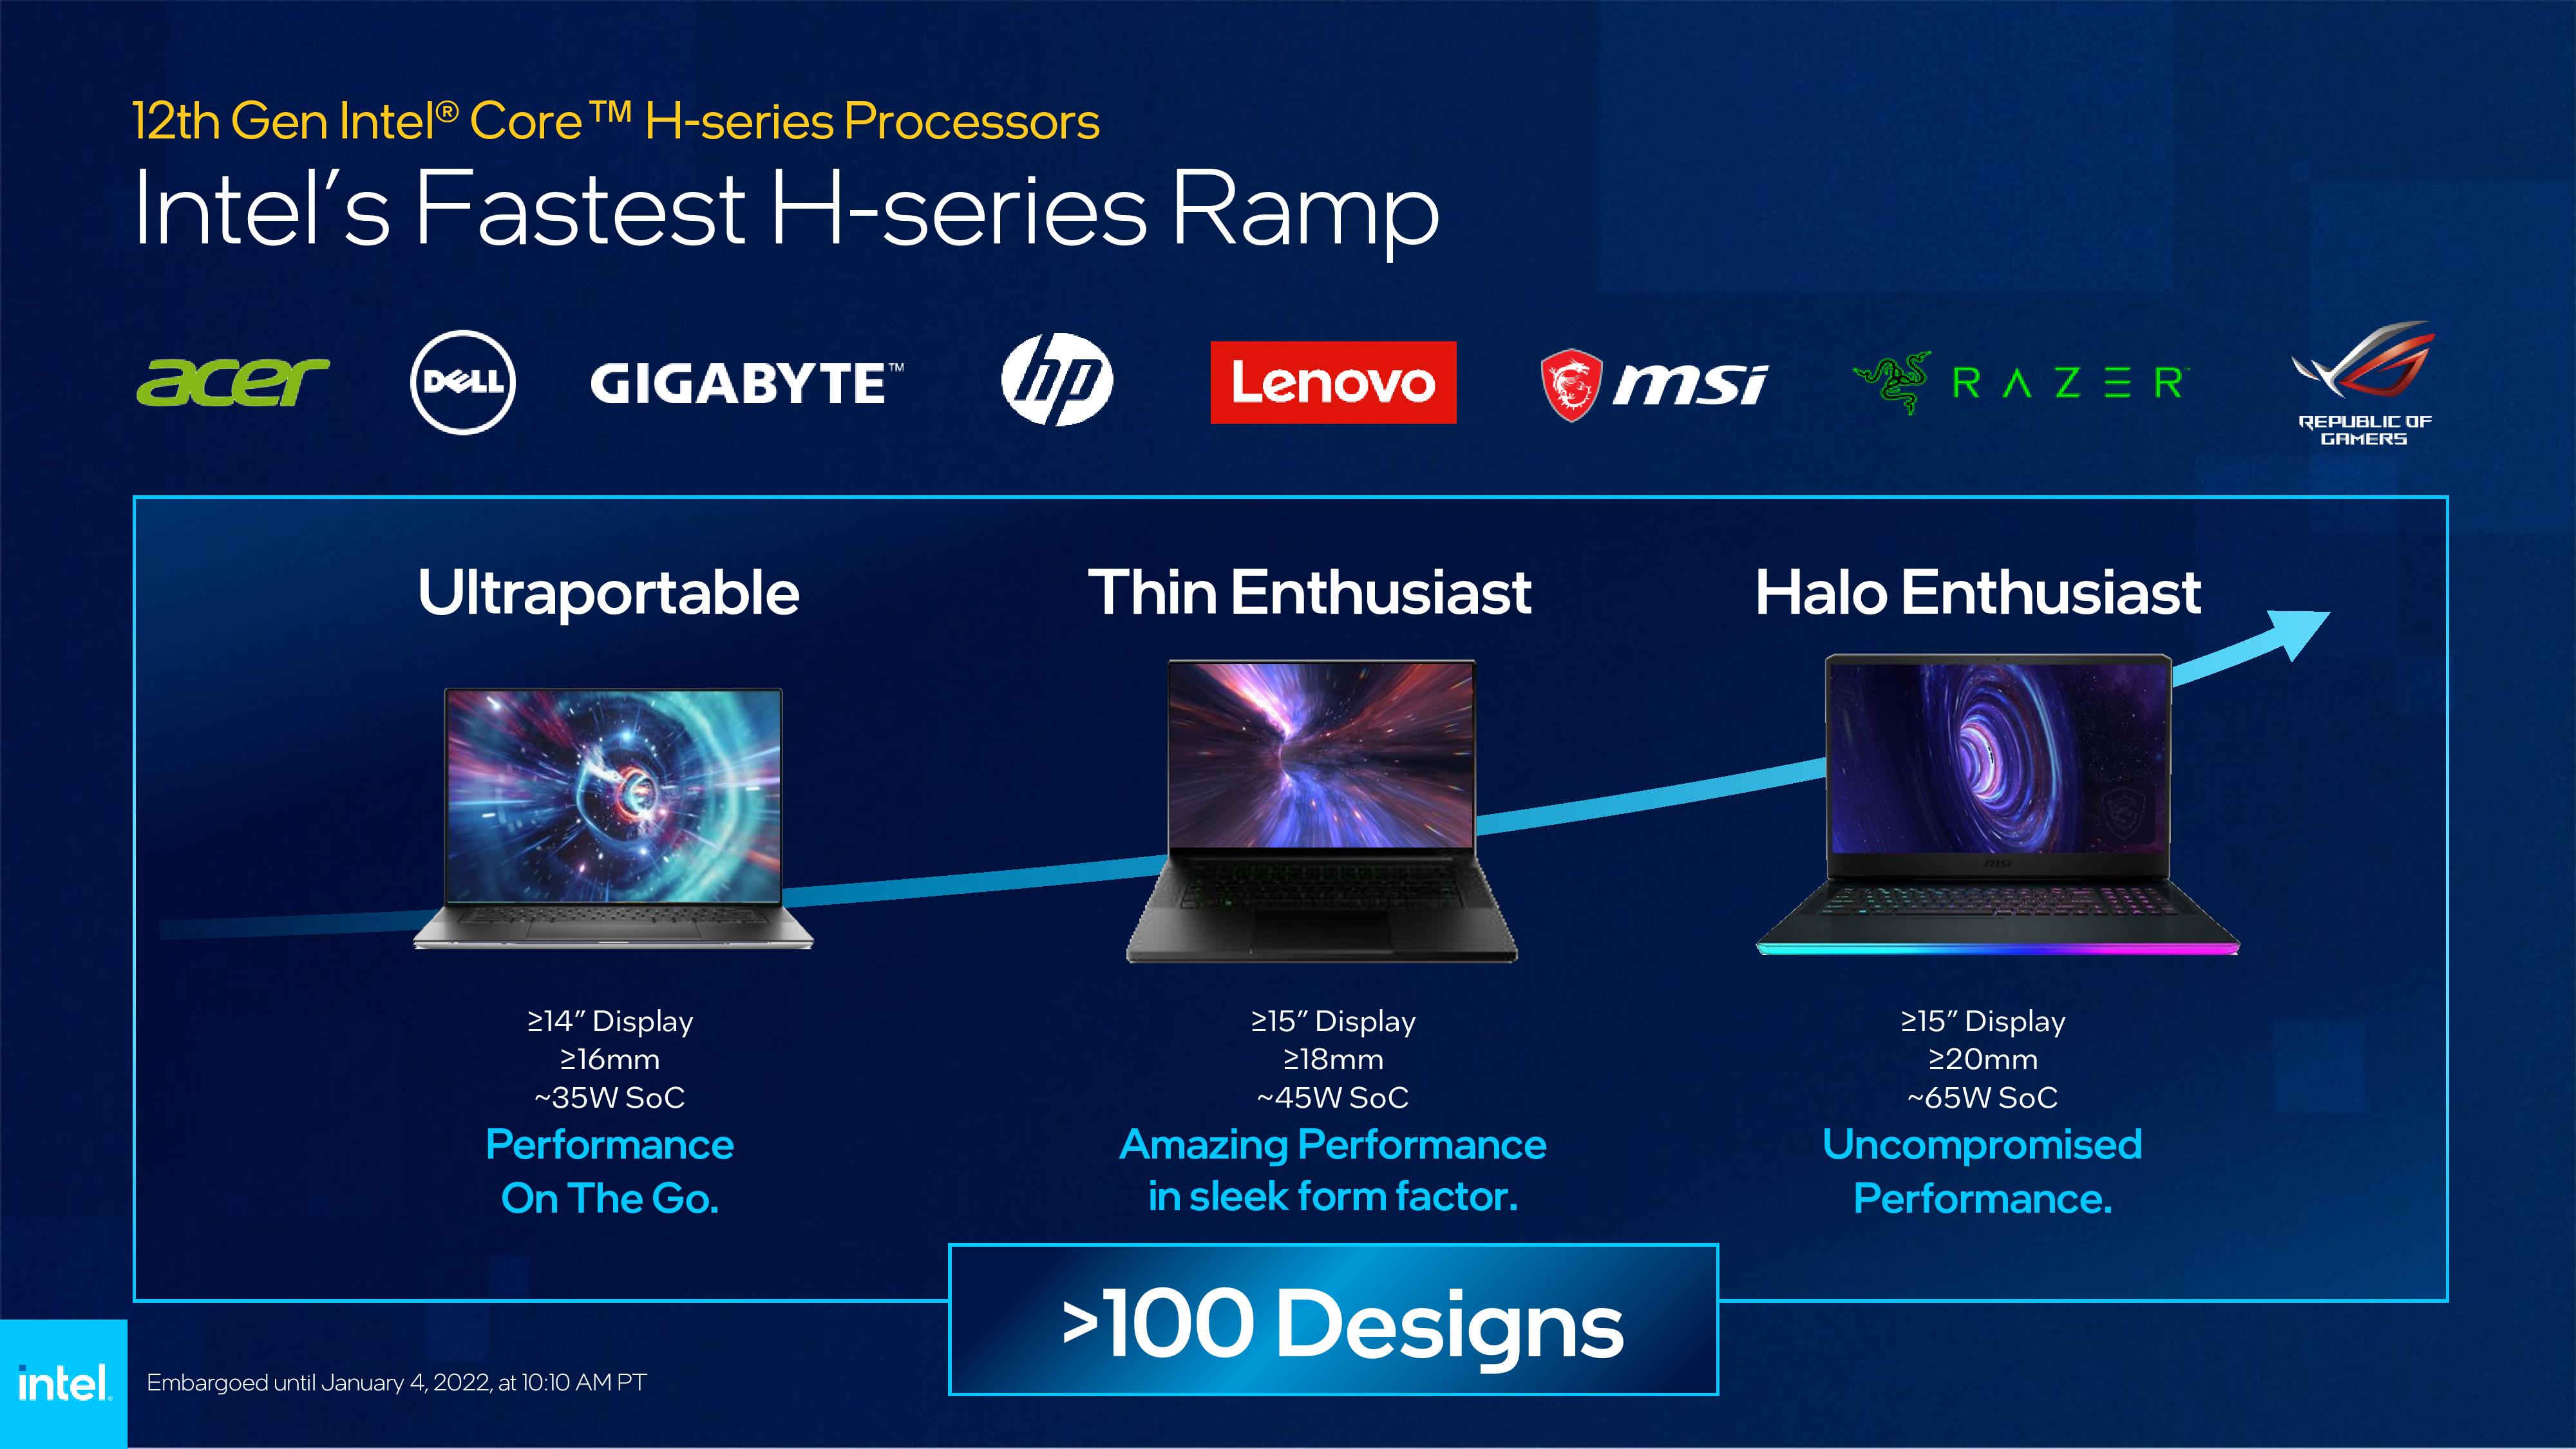 12th-gen Intel Core laptop CPUs bring up to 14 cores to high-end portables